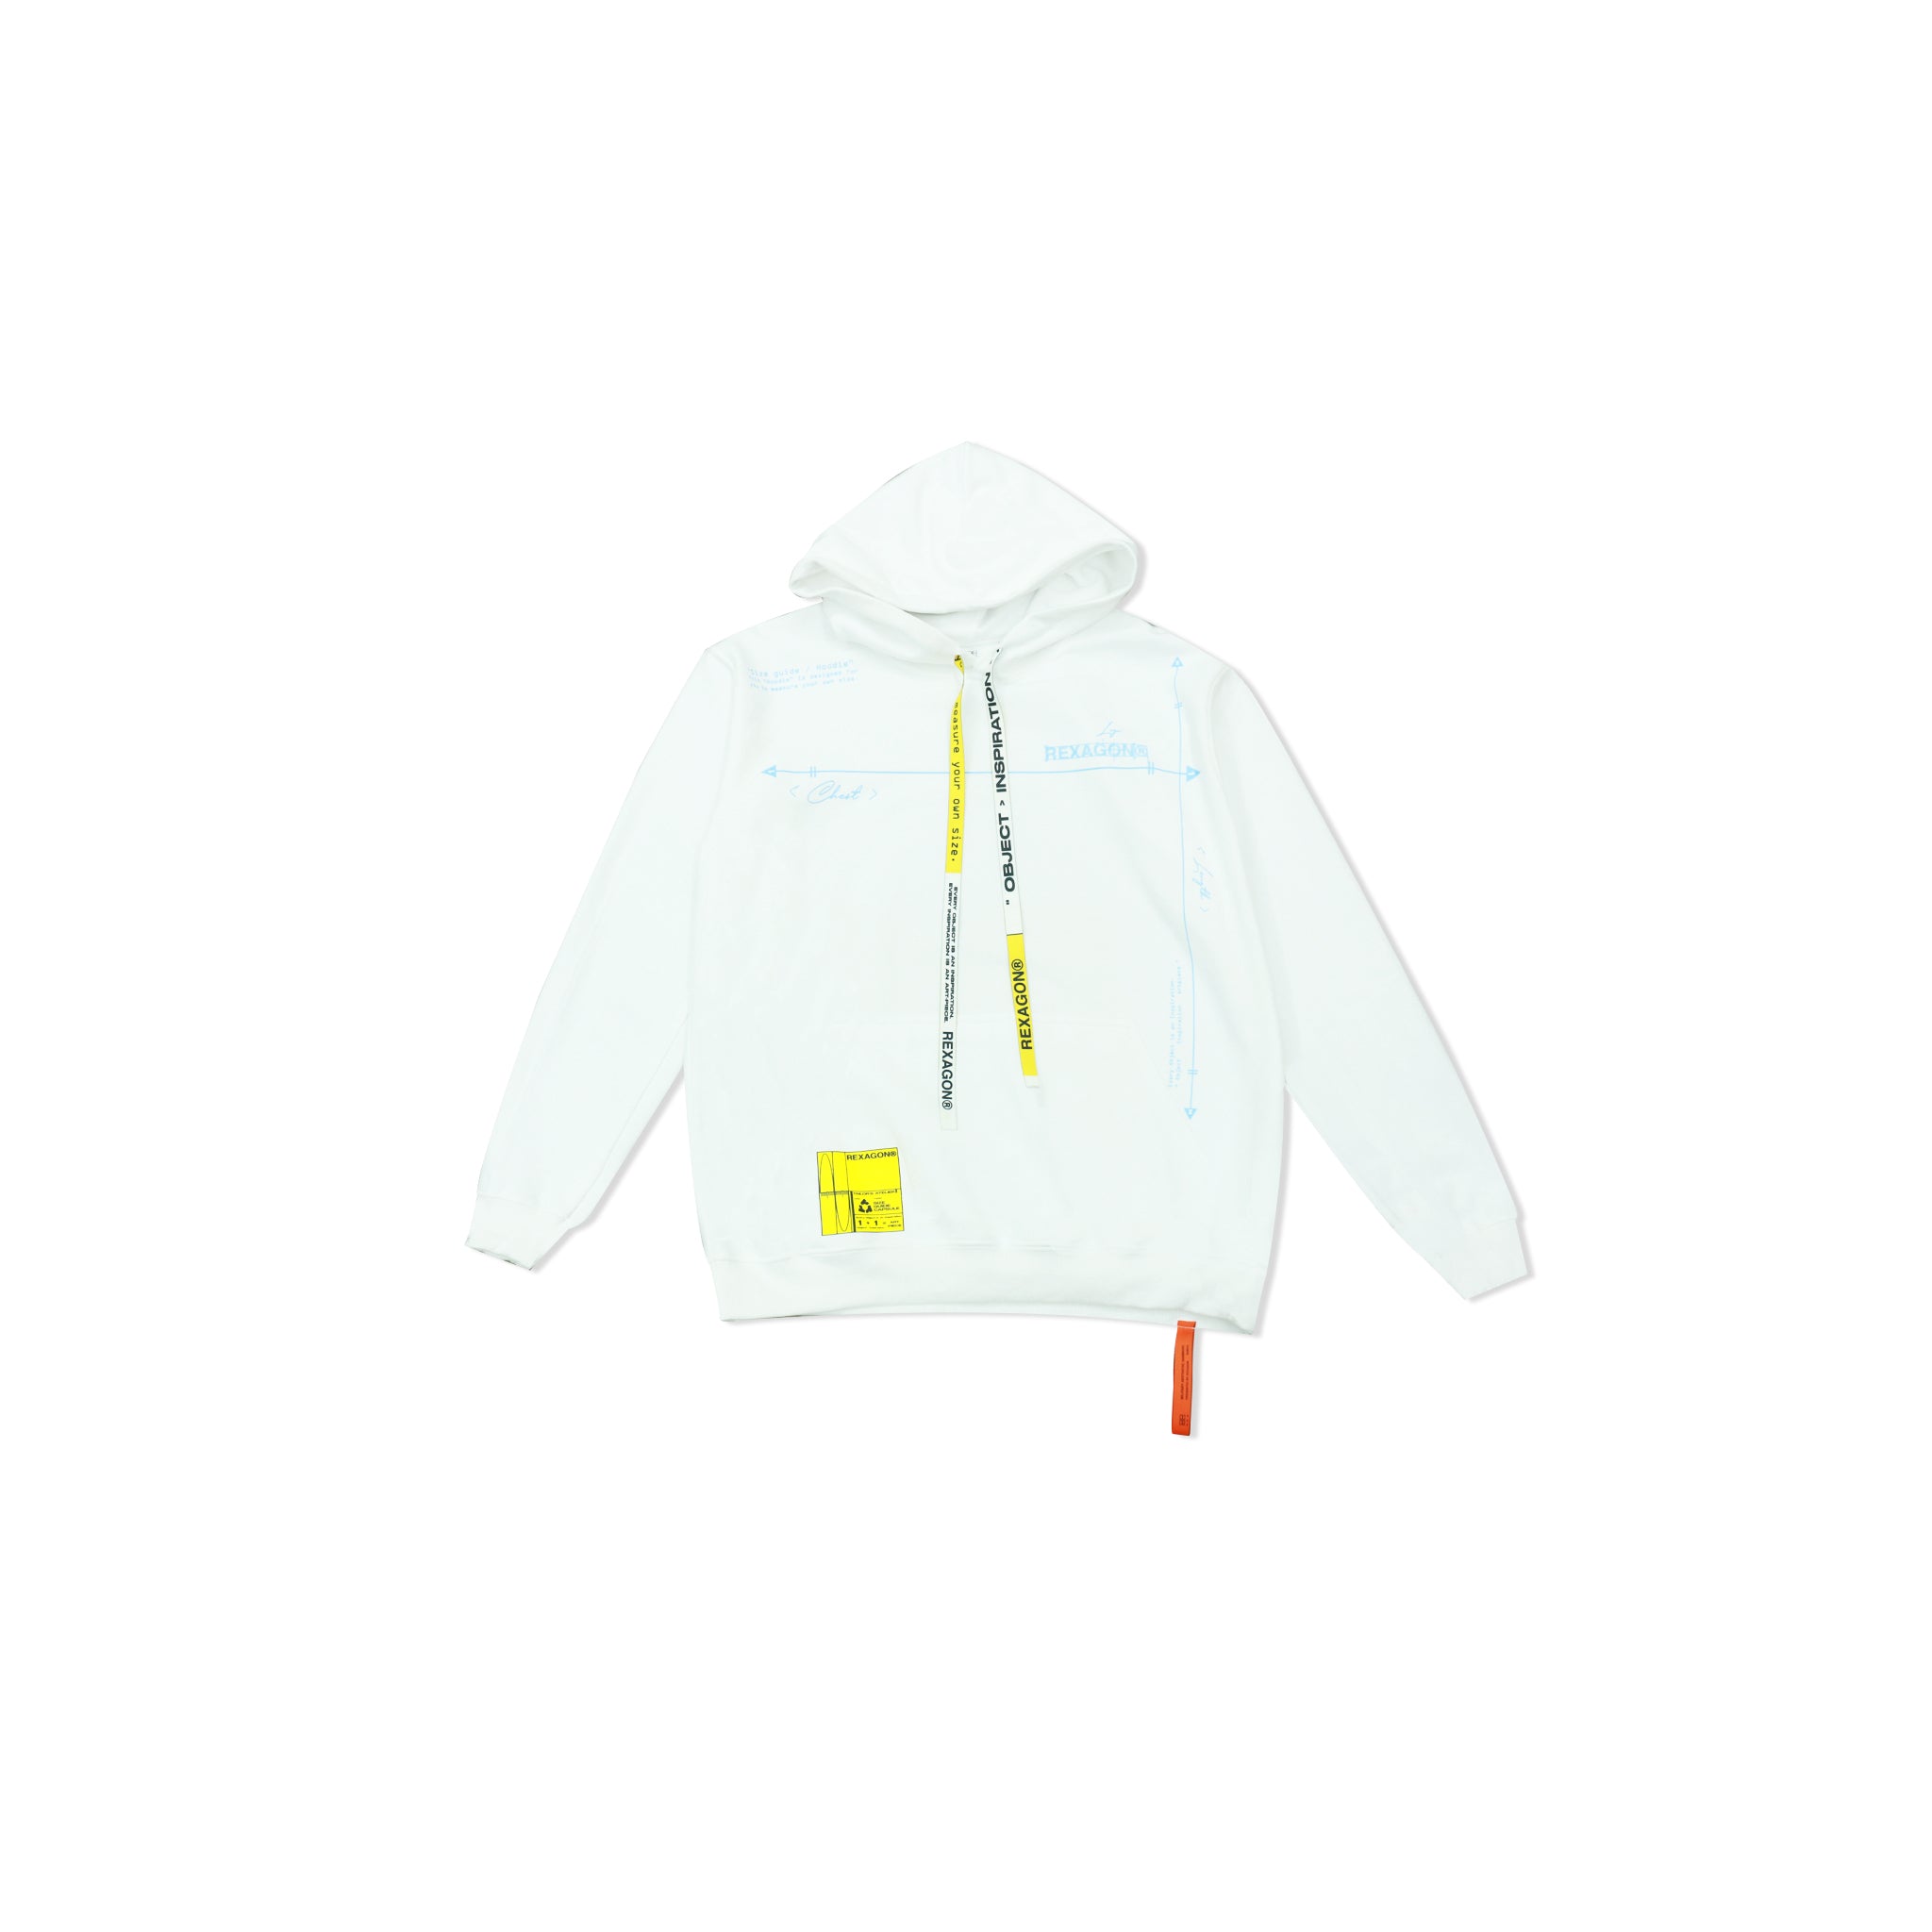 "SIZE GUIDE" Hoodie - White